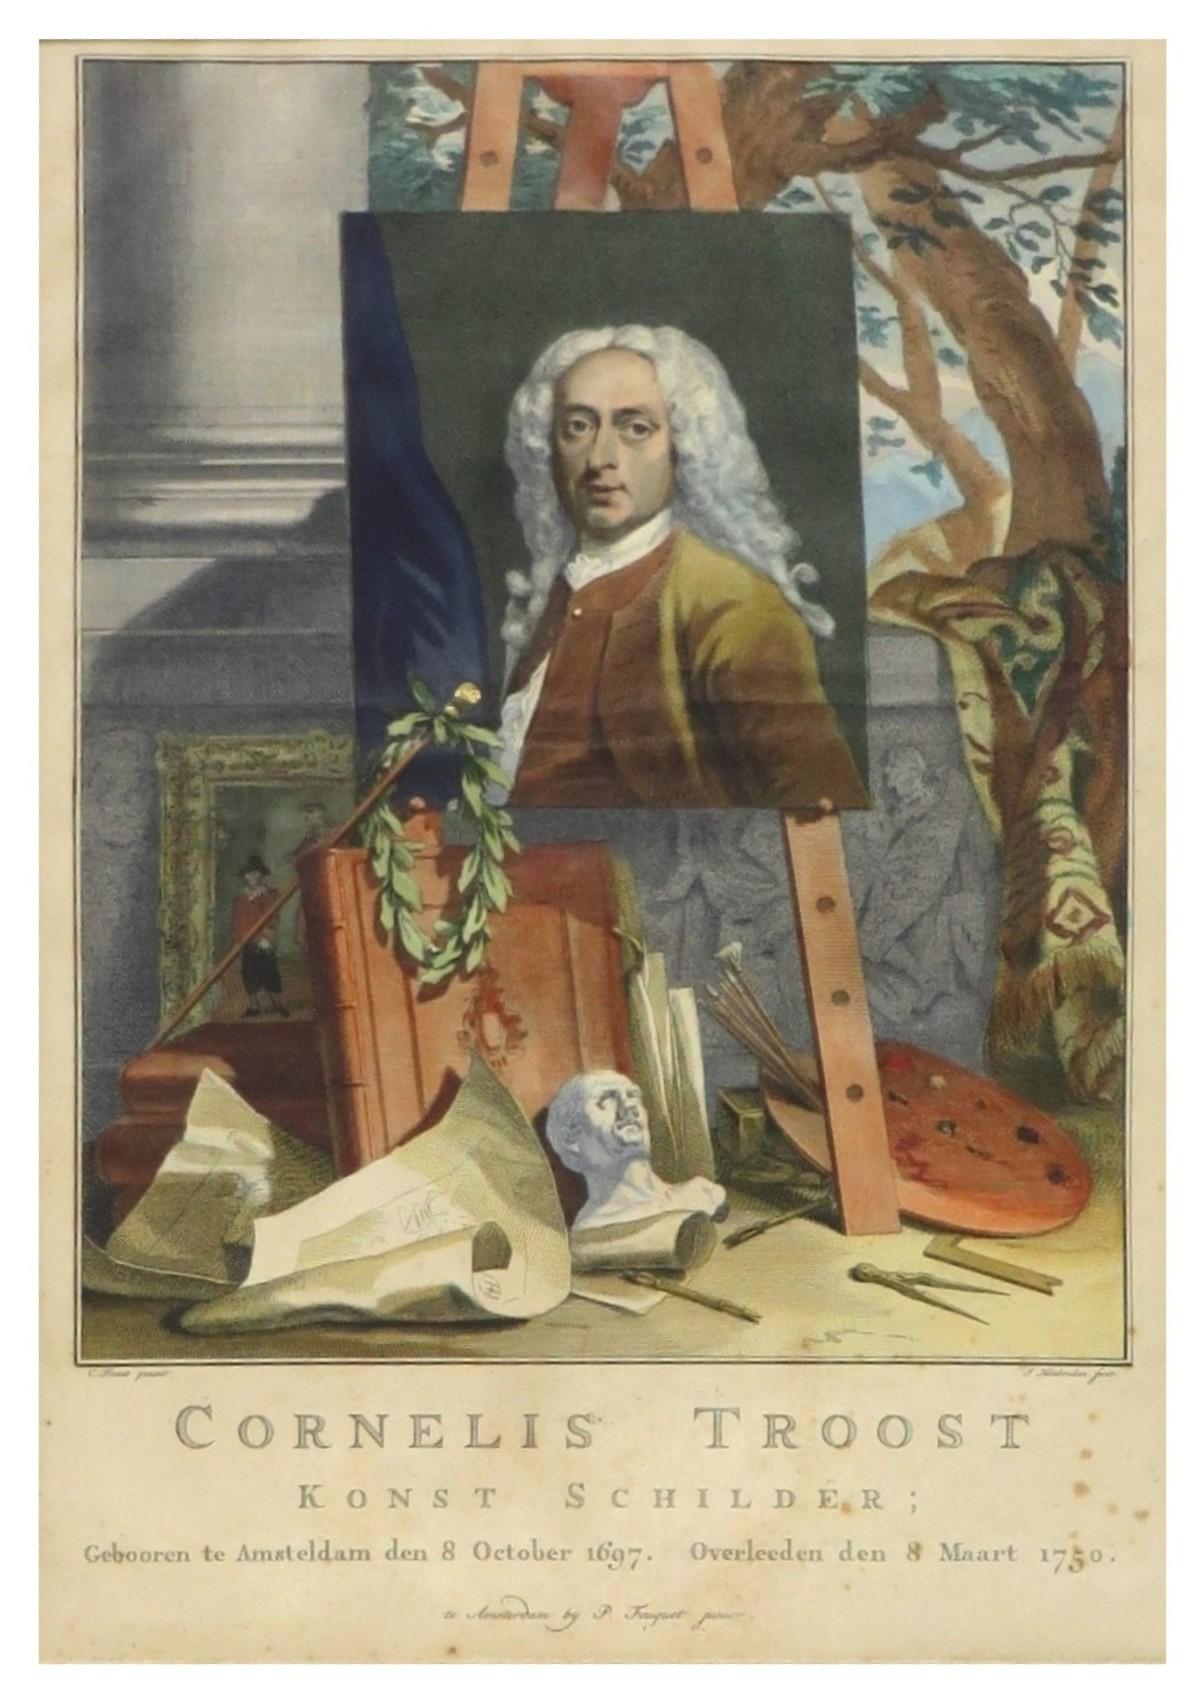 An impressive collection of prints by Cornelis Troost shows vividly the everyday life of the eighteenth-century middle class. Colored by one hand and heightened with gold.

Publisher:	Pierre Fouquet, Cornelis Troost (1696-1750)
Place /